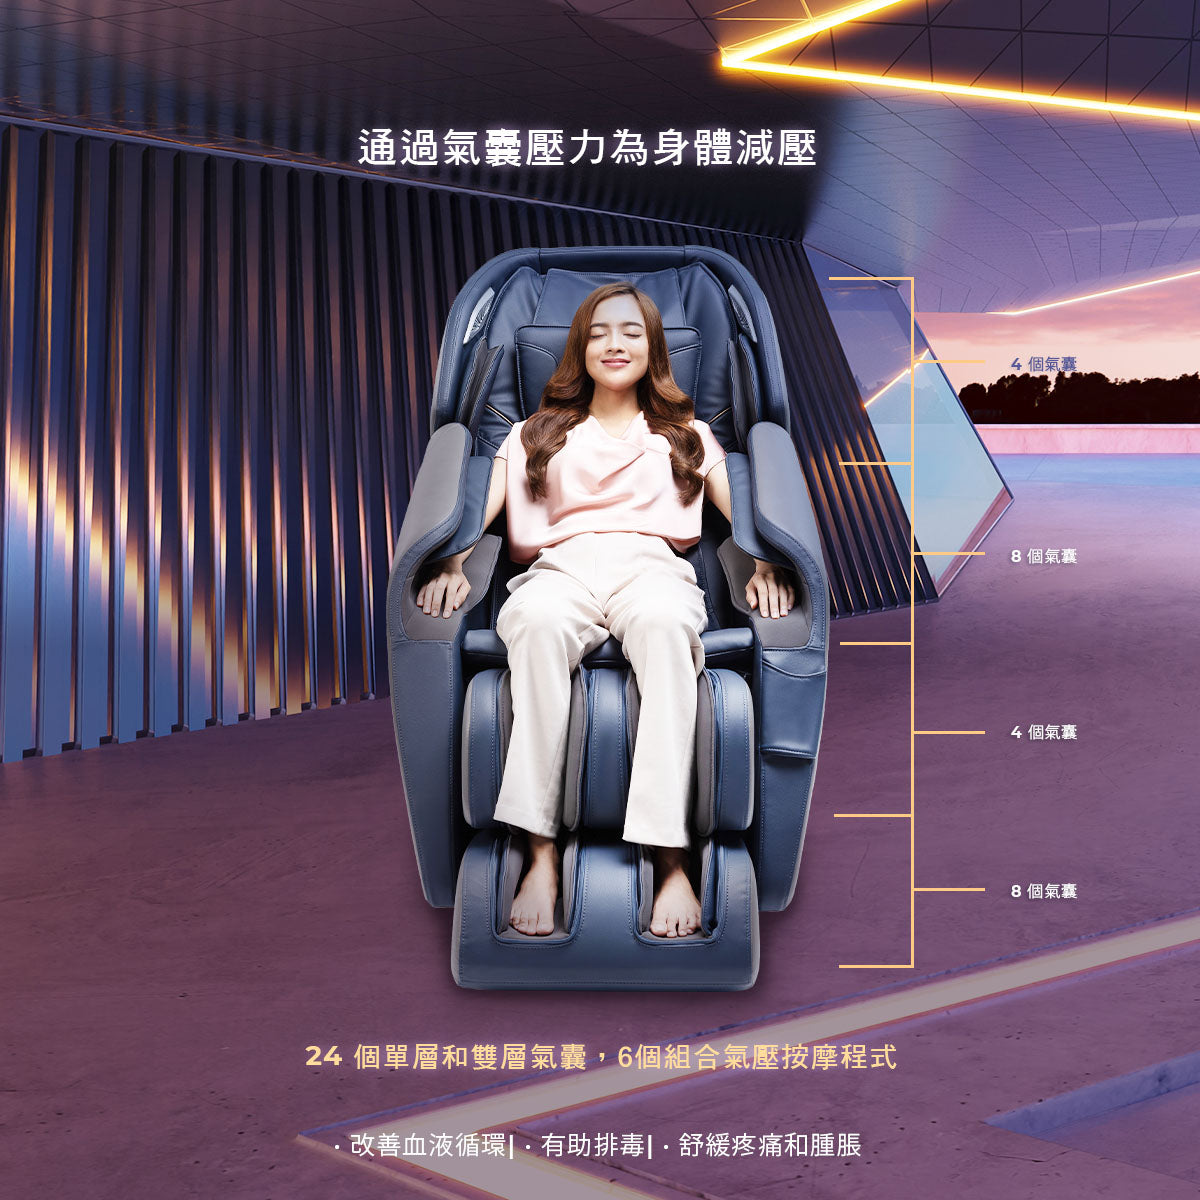 ITSU Omni Full-Featured Massage Chair (NEW PRODUCT)